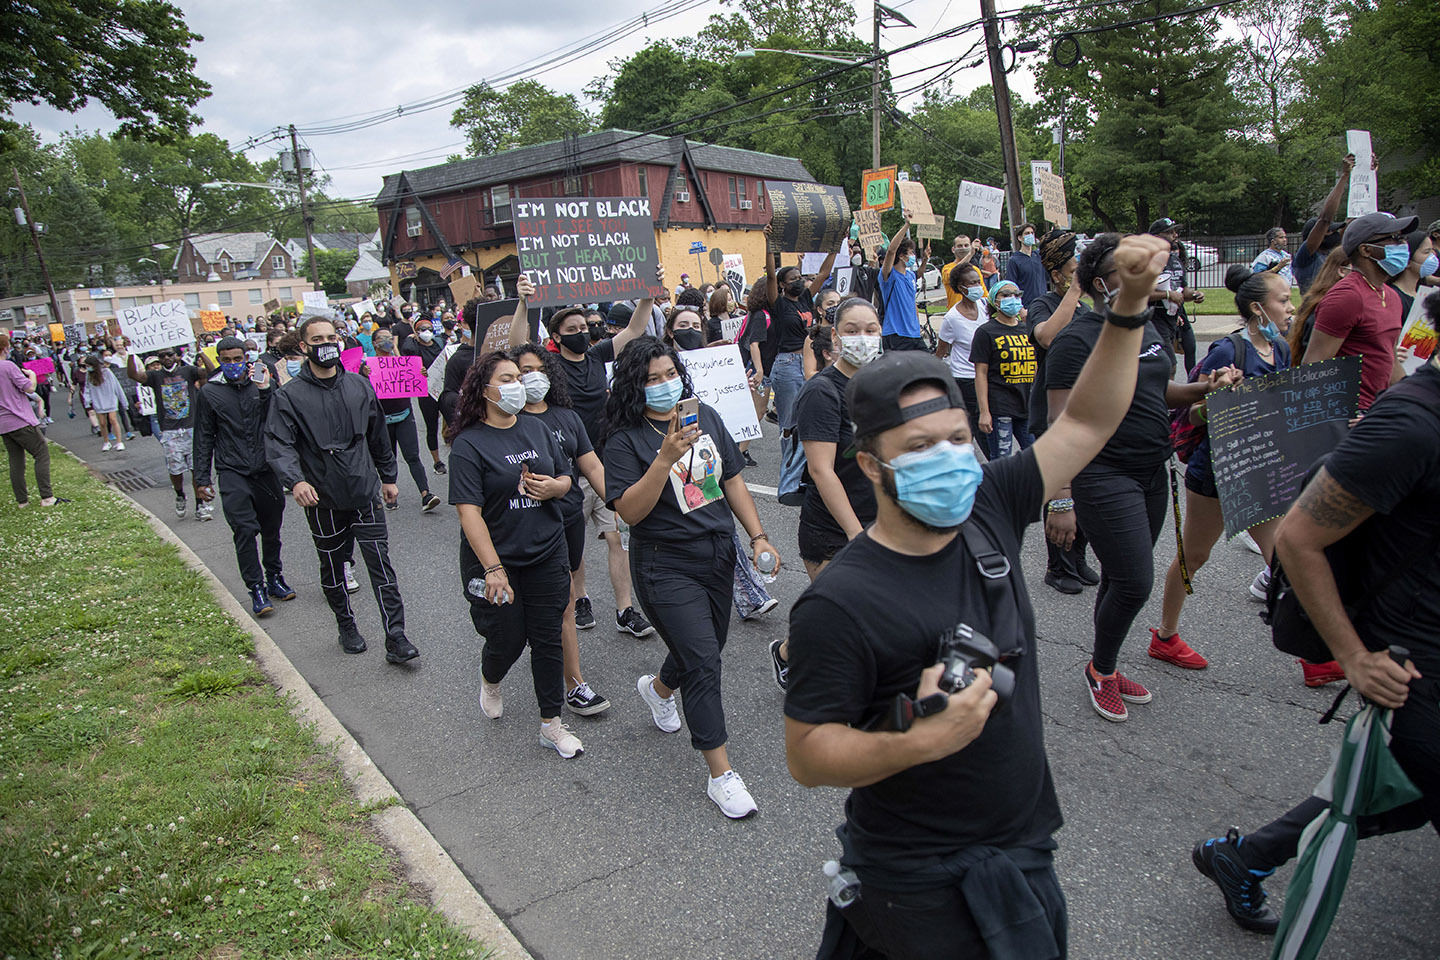 A peaceful protest through Teaneck, NJ for the appalling death of George Floyd, who was killed by a Minn. police officer. 06/5/2020  Photos by Jeff Rhode